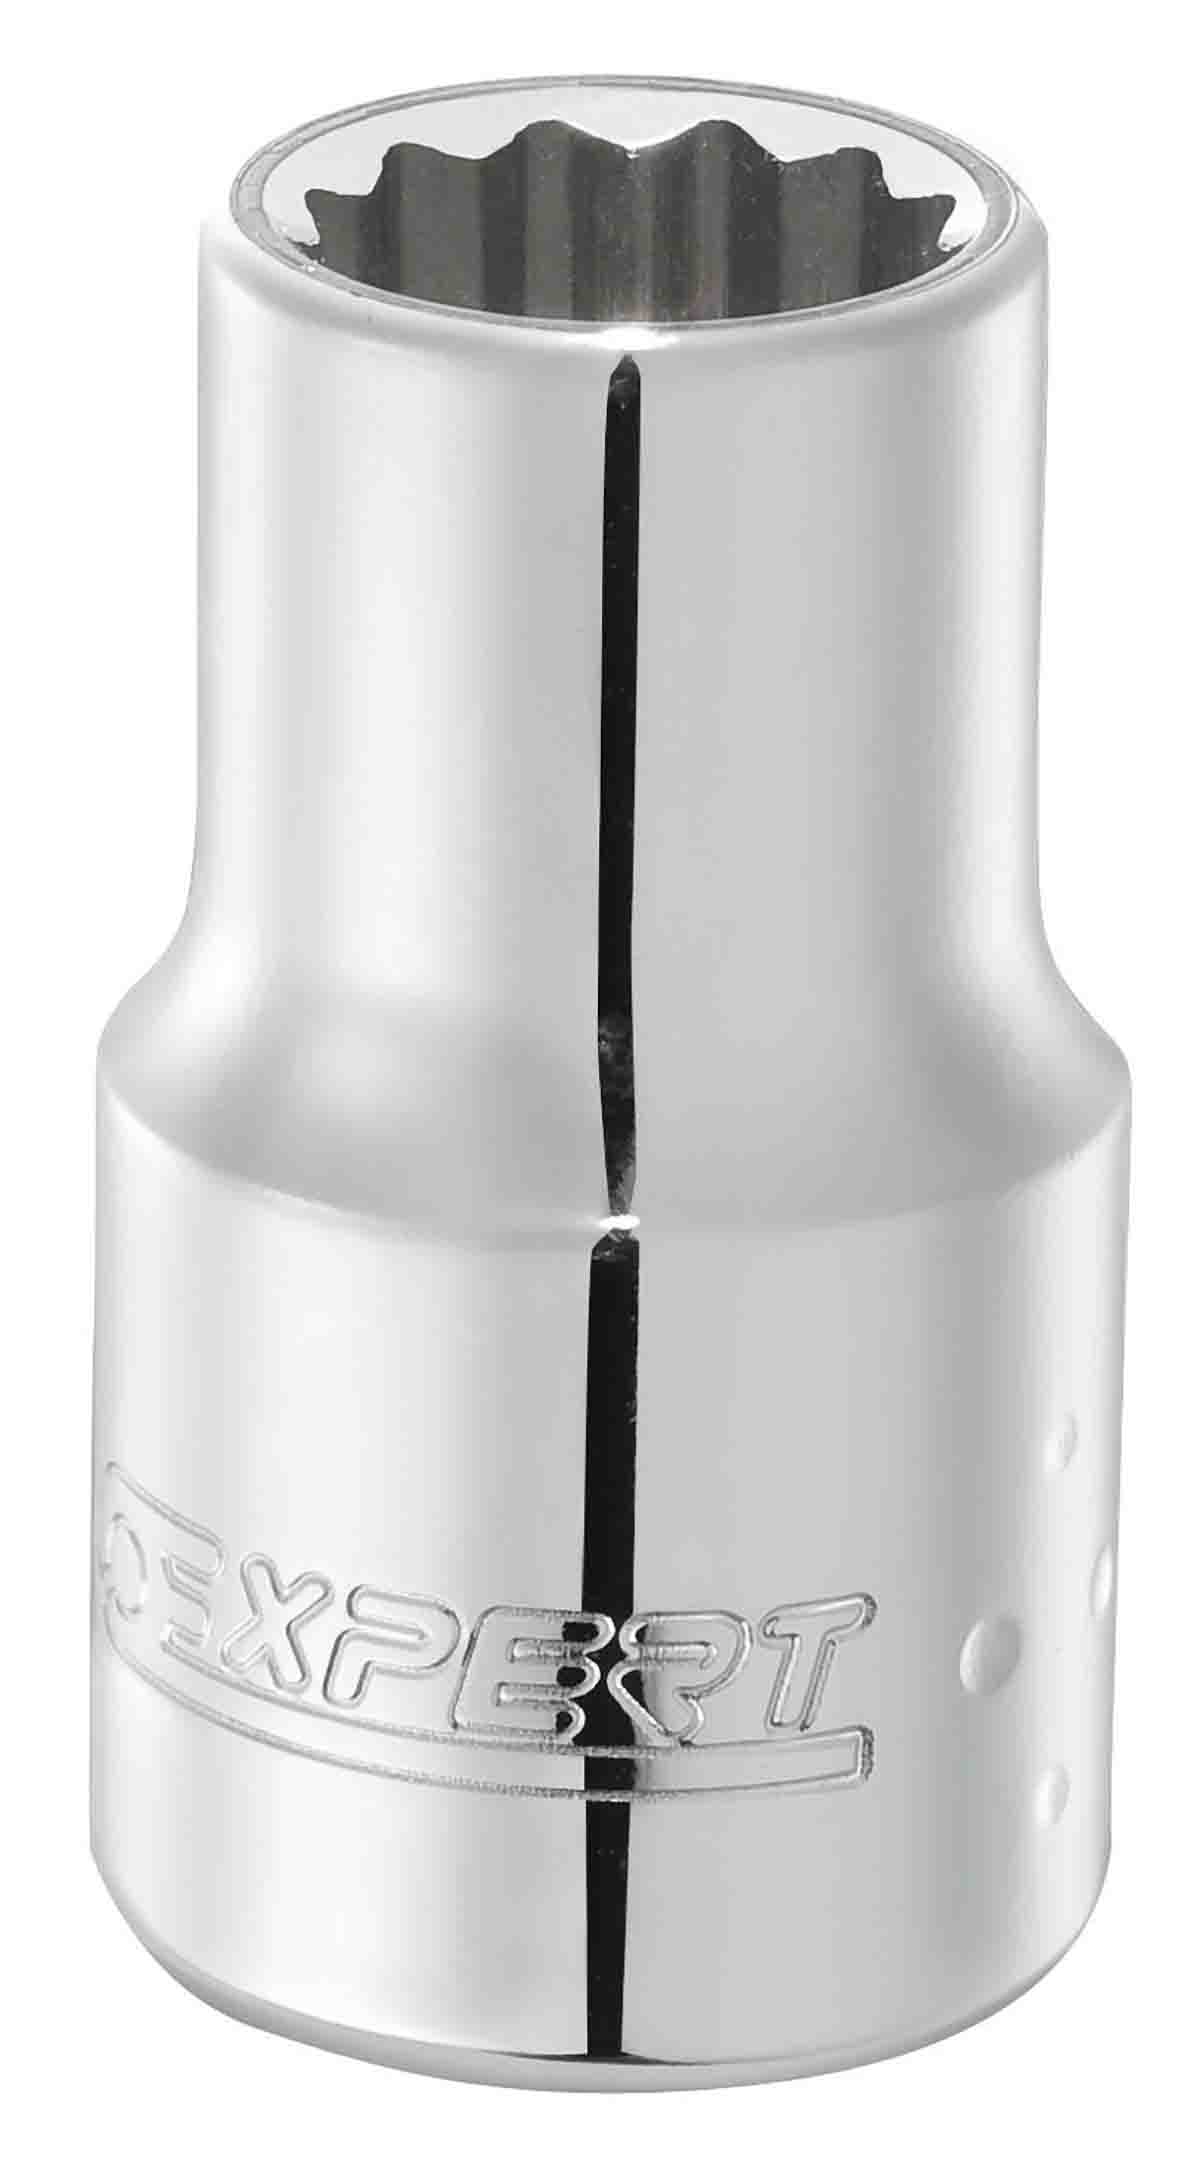 Expert by Facom 11mm Bi-Hex Socket With 1/2 in Drive , Length 38 mm